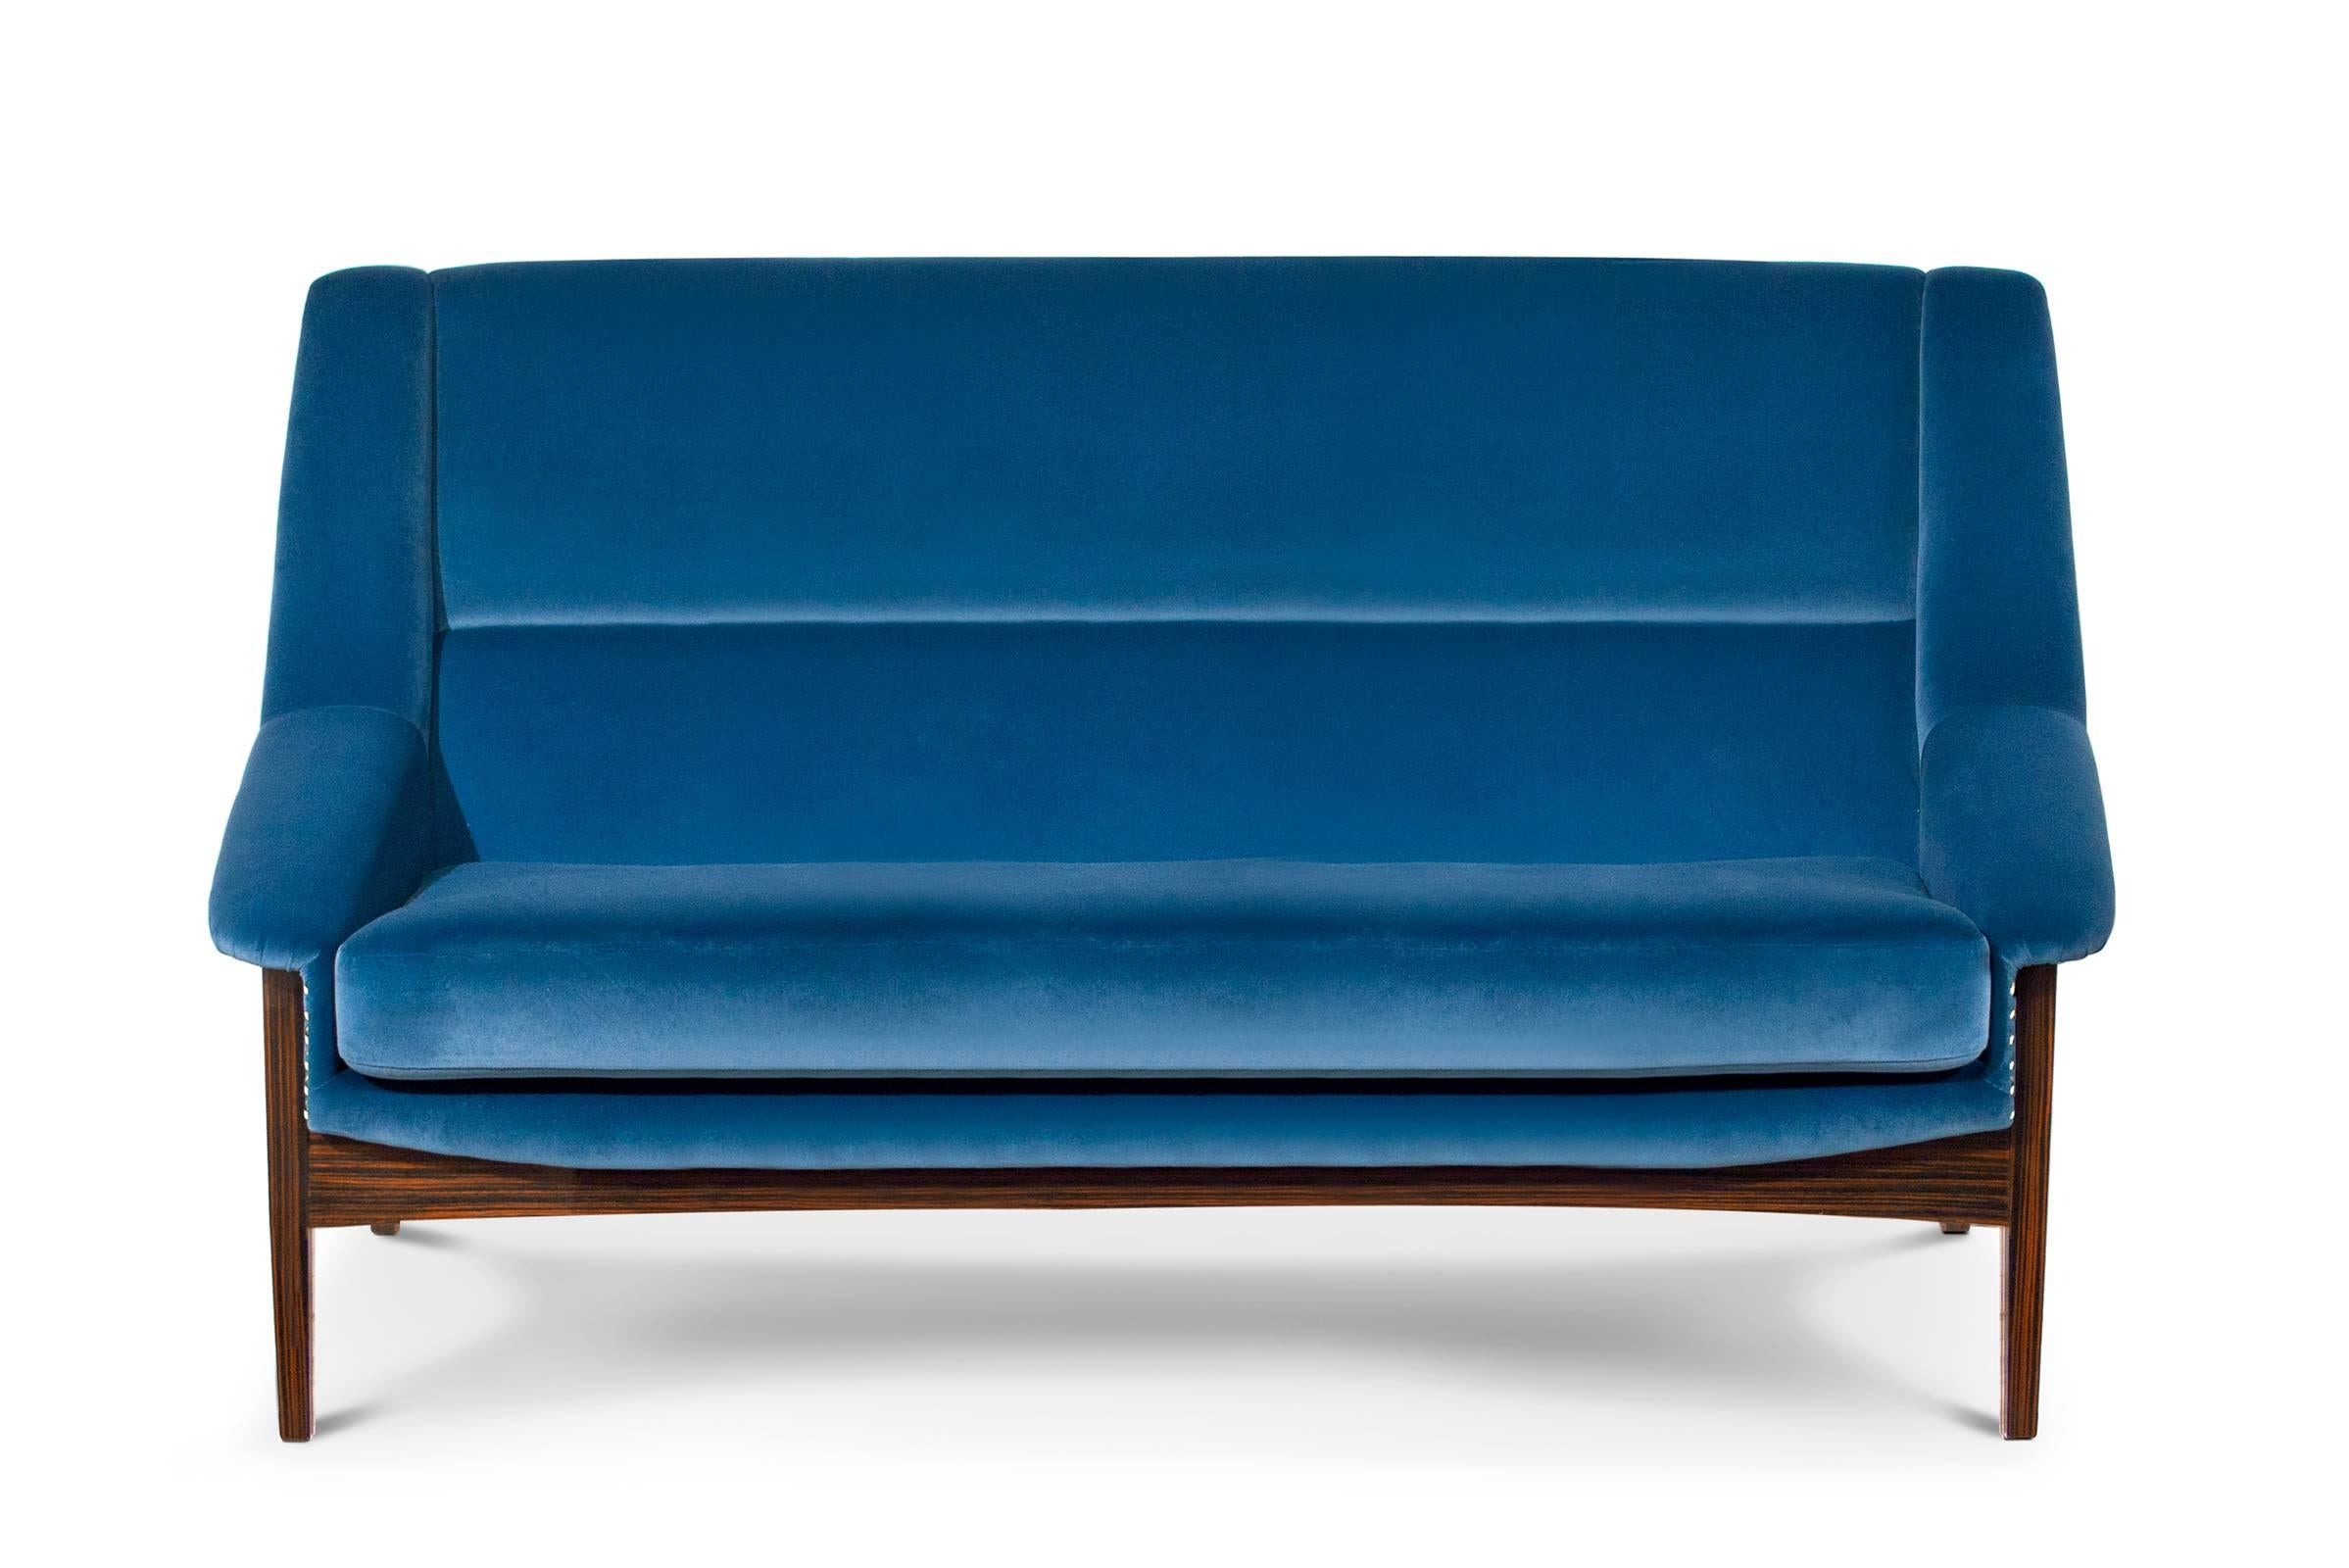 Sofa Prima two seater in blue cotton velvet fabric and
ebony wood veneer structure with glossy varnish
and polished gold nails. Also available in Prima armchair 
and with other fabrics finish on request.